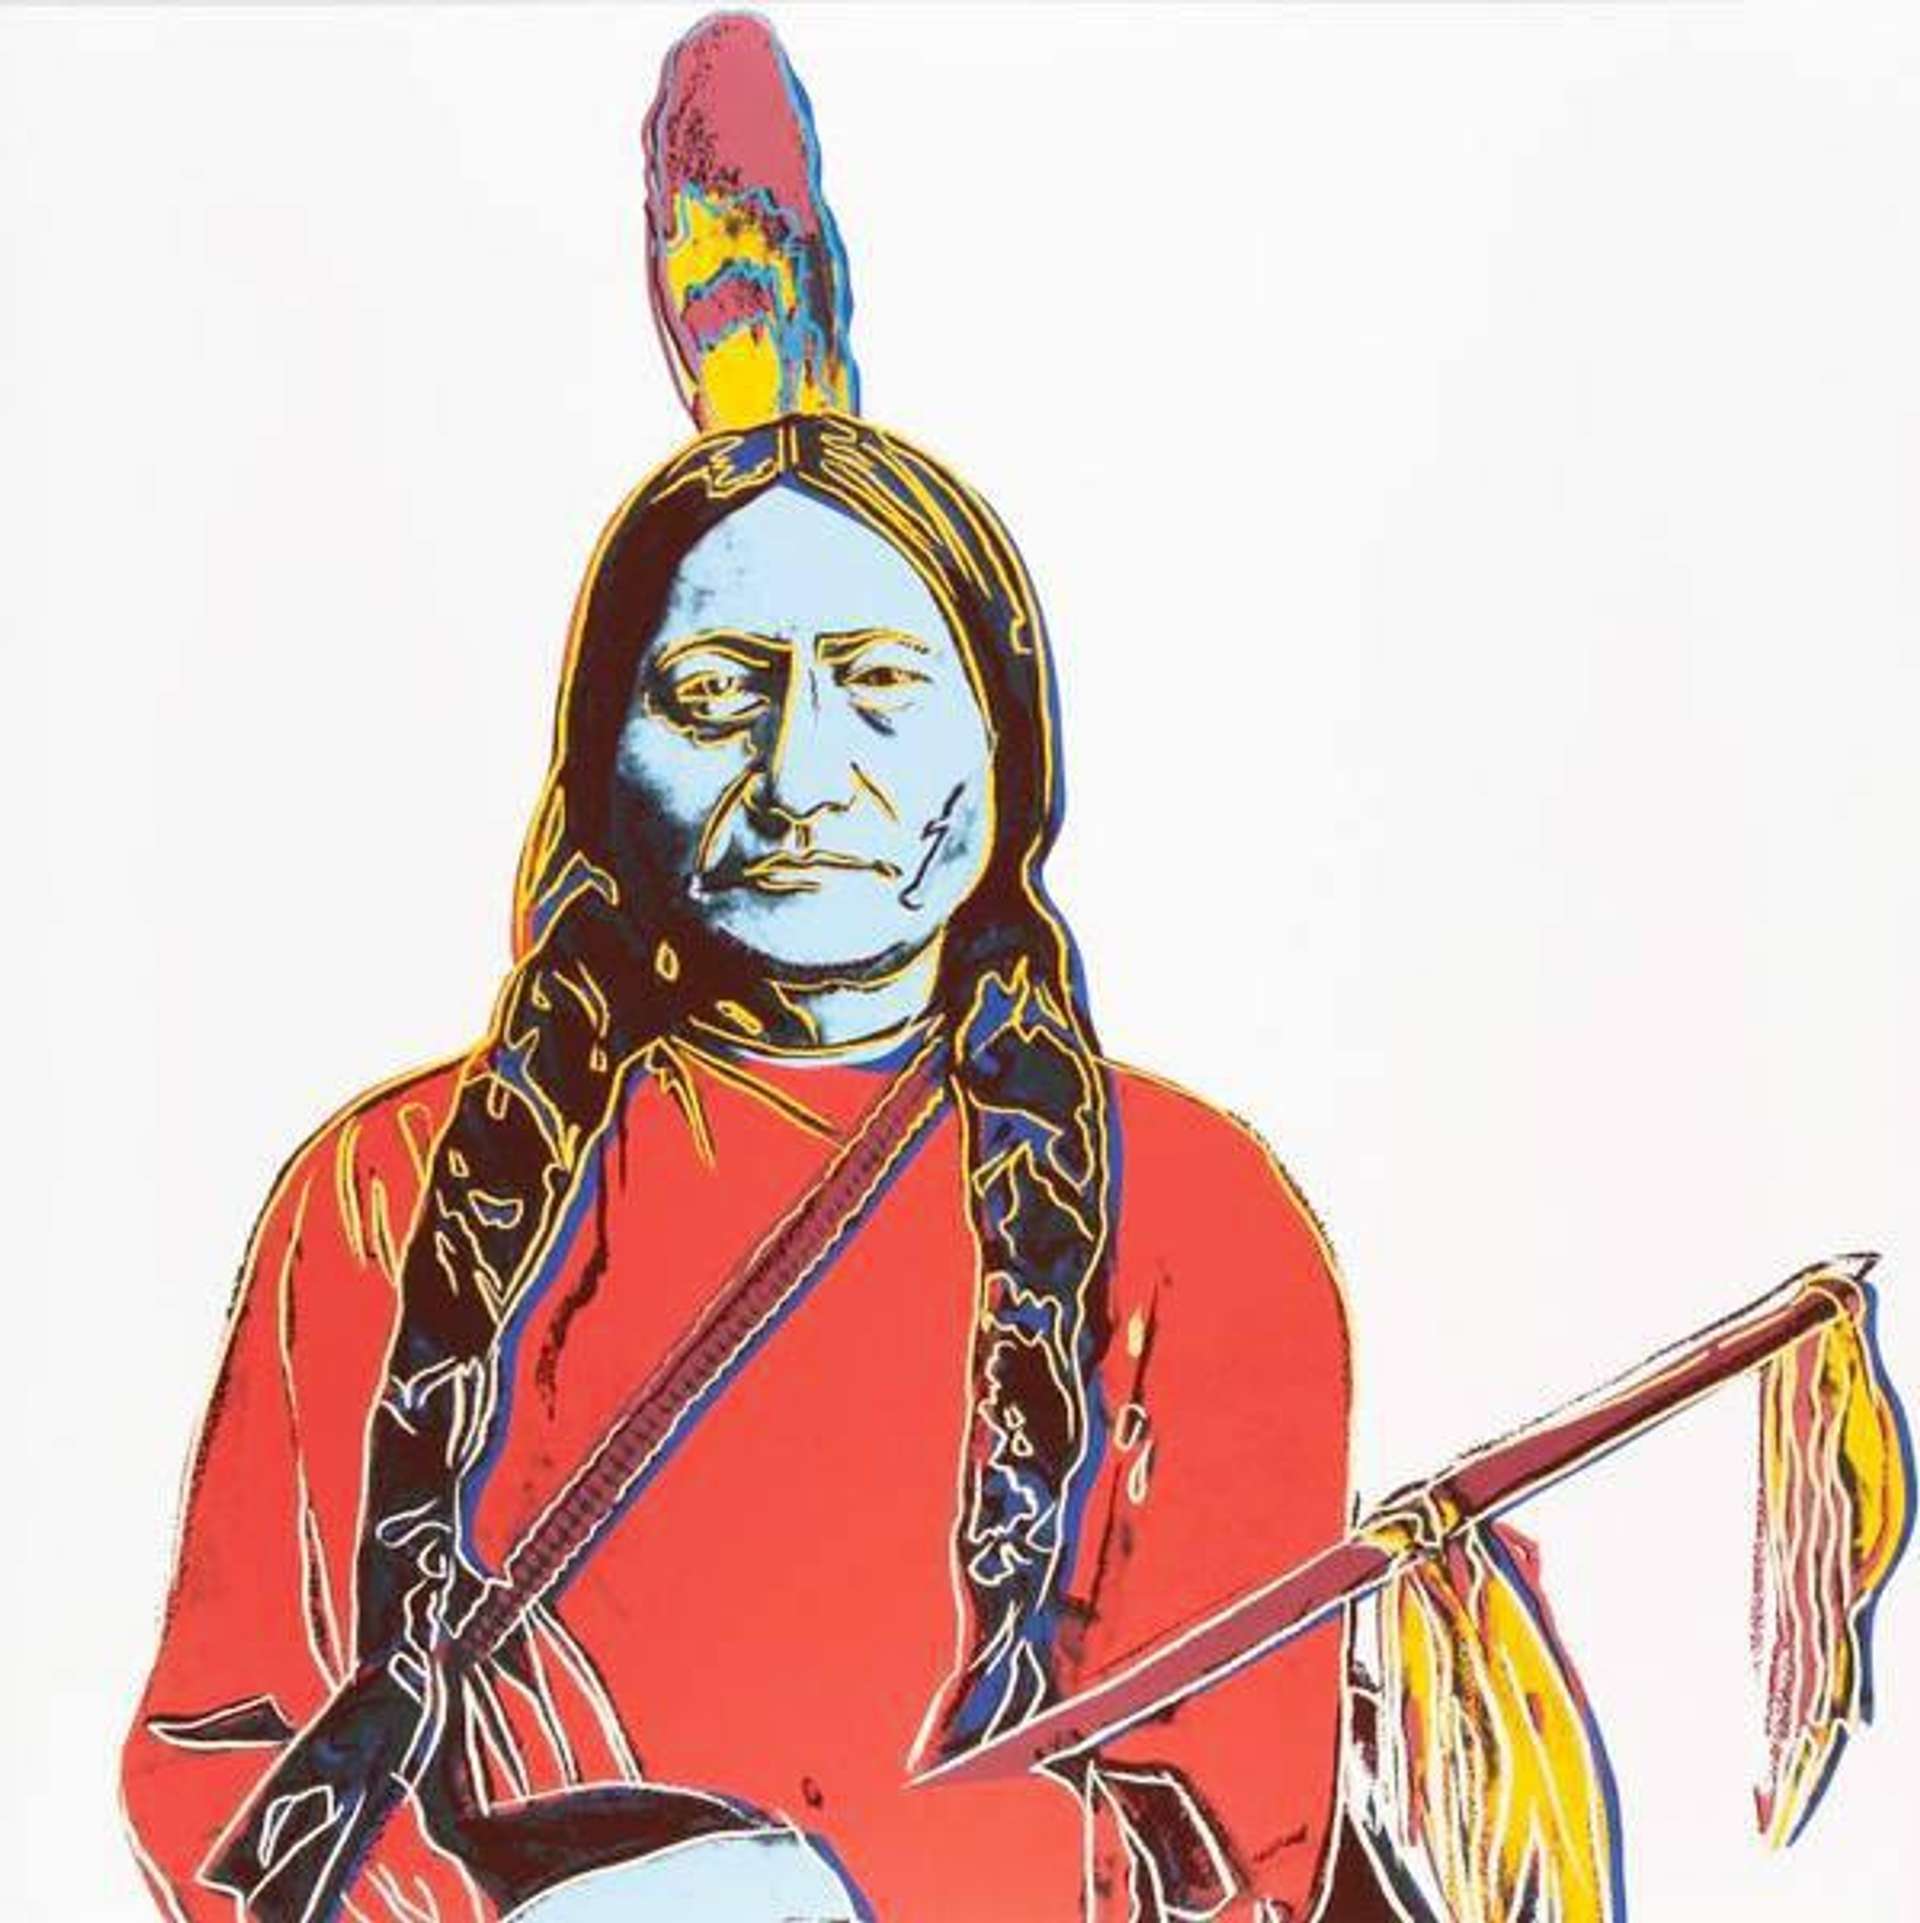 A screenprint by Andy Warhol depicting Sitting Bull depicted in bright yellow and blue, set against a white background.